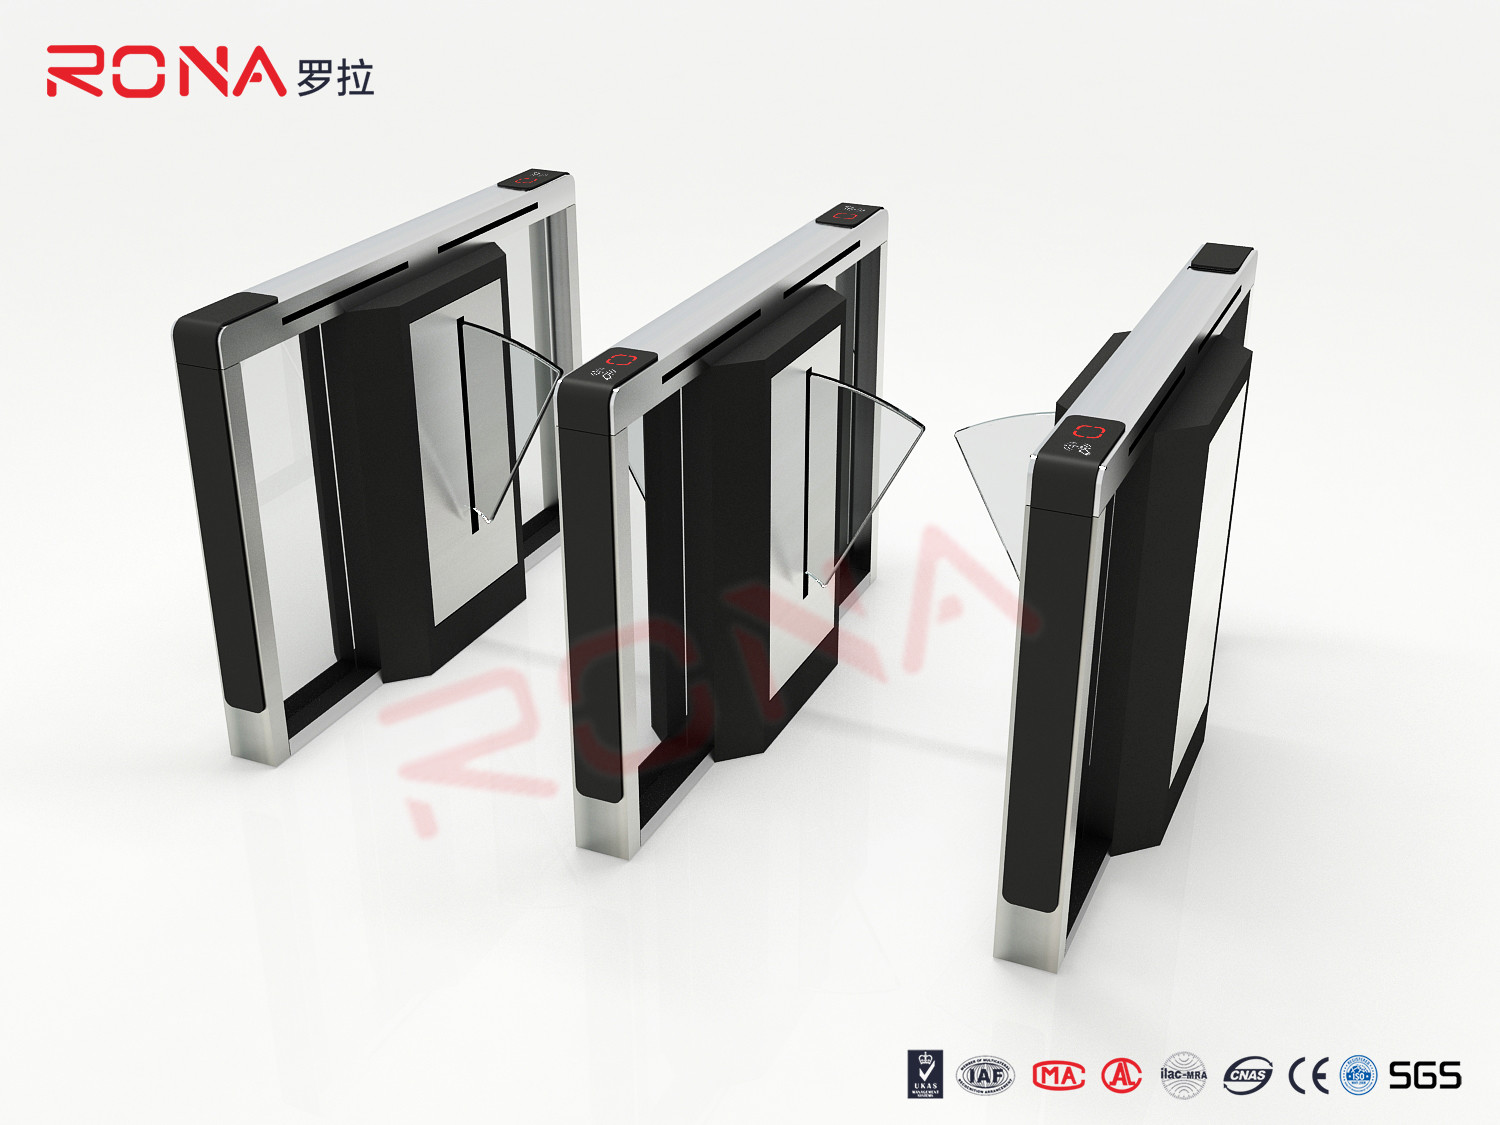  550mm Passage Flap Barrier Gate Security Subway Entry Systems Waist Height Turnstiles Manufactures